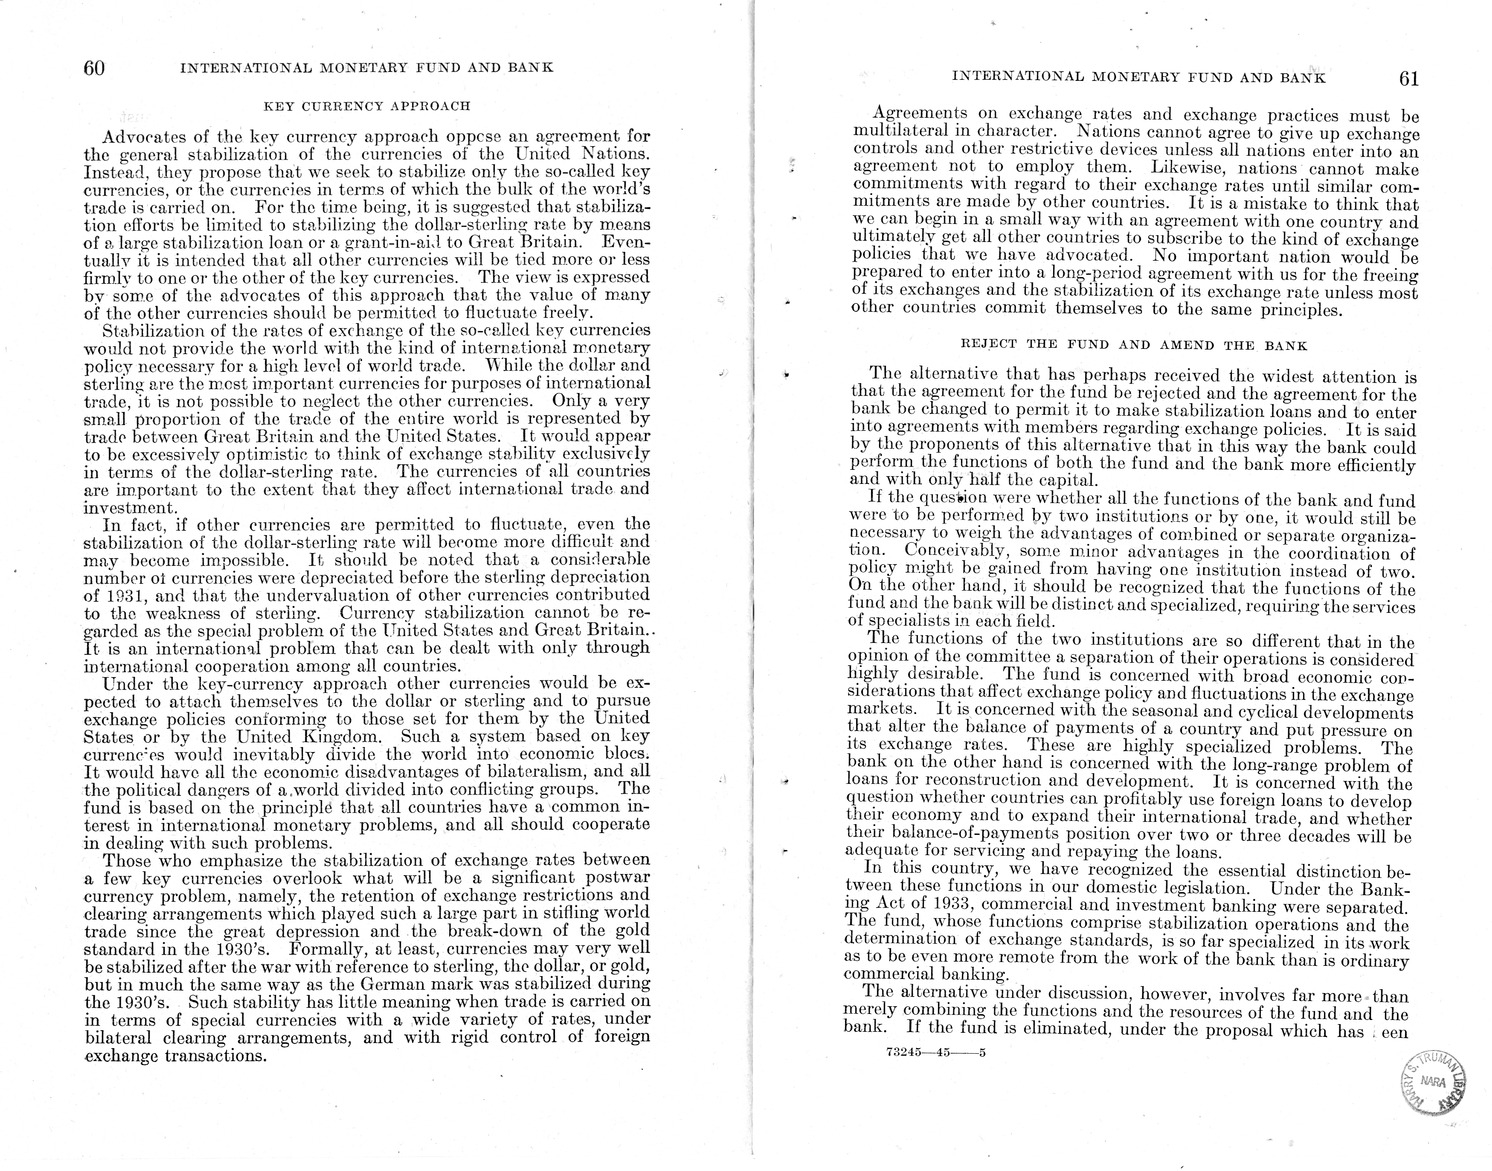 Memorandum from Harold D. Smith to M. C. Latta, H.R. 3314, to Provide for the Participation of the United States in the International Monetary Fund and the International Bank for Reconstruction and Development, with Attachments